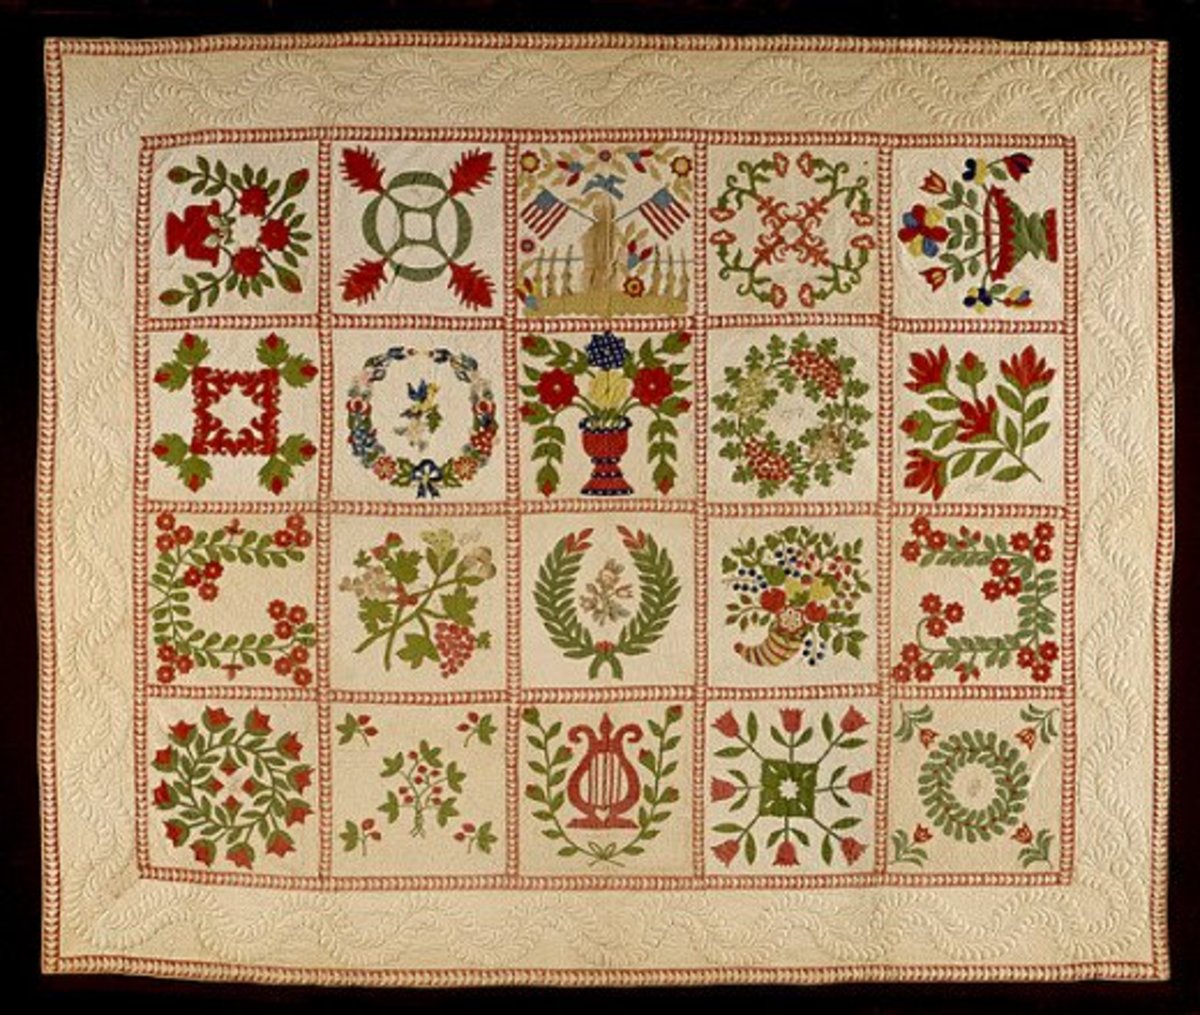 Baltimore Album quilts were commonly made for special occasions.